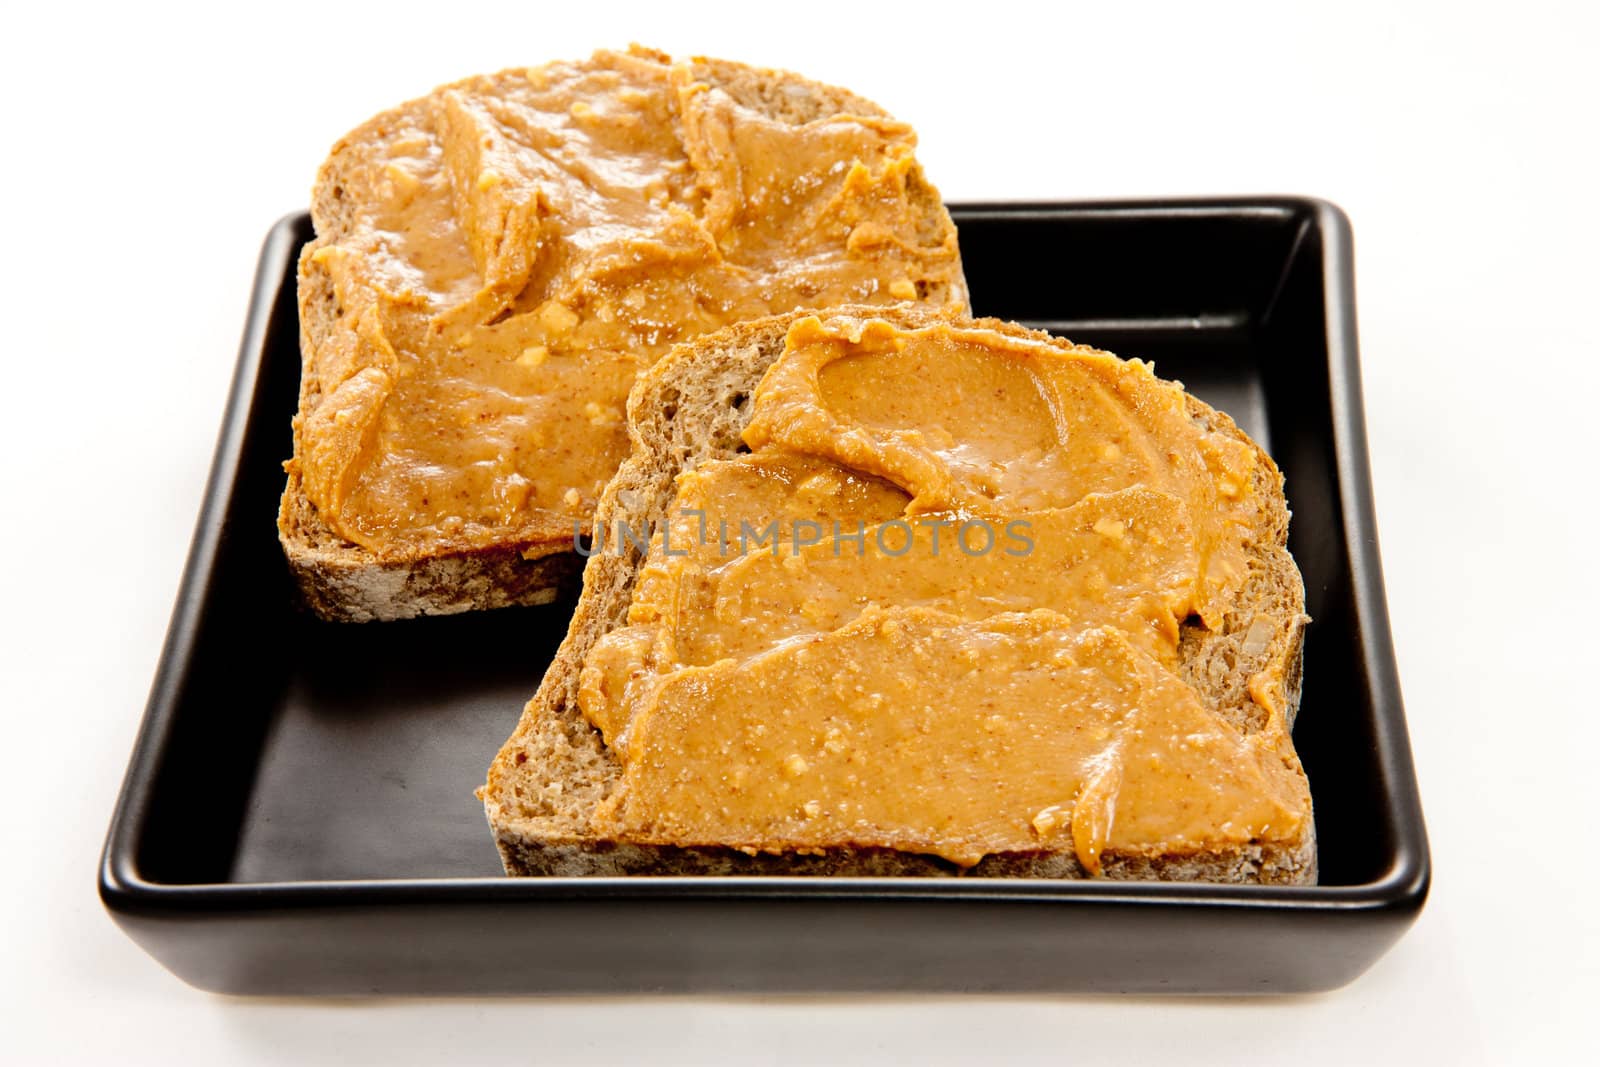 Picture of two slices of bread with peanut butter